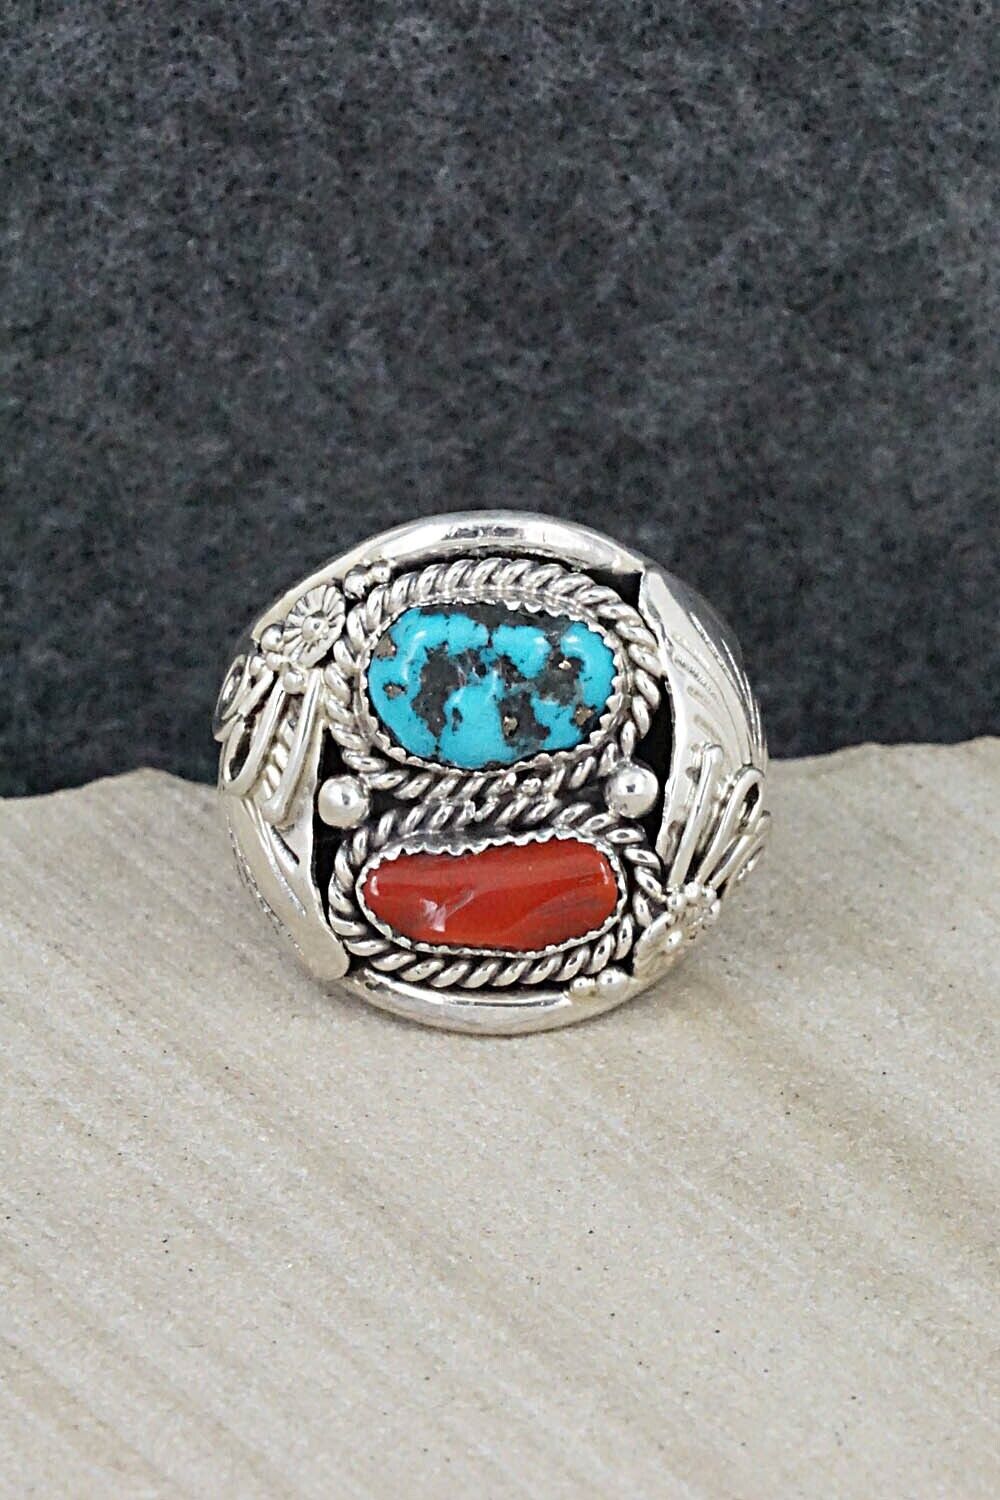 Turquoise, Coral & Sterling Silver Ring - Leonard Spencer - 12.5